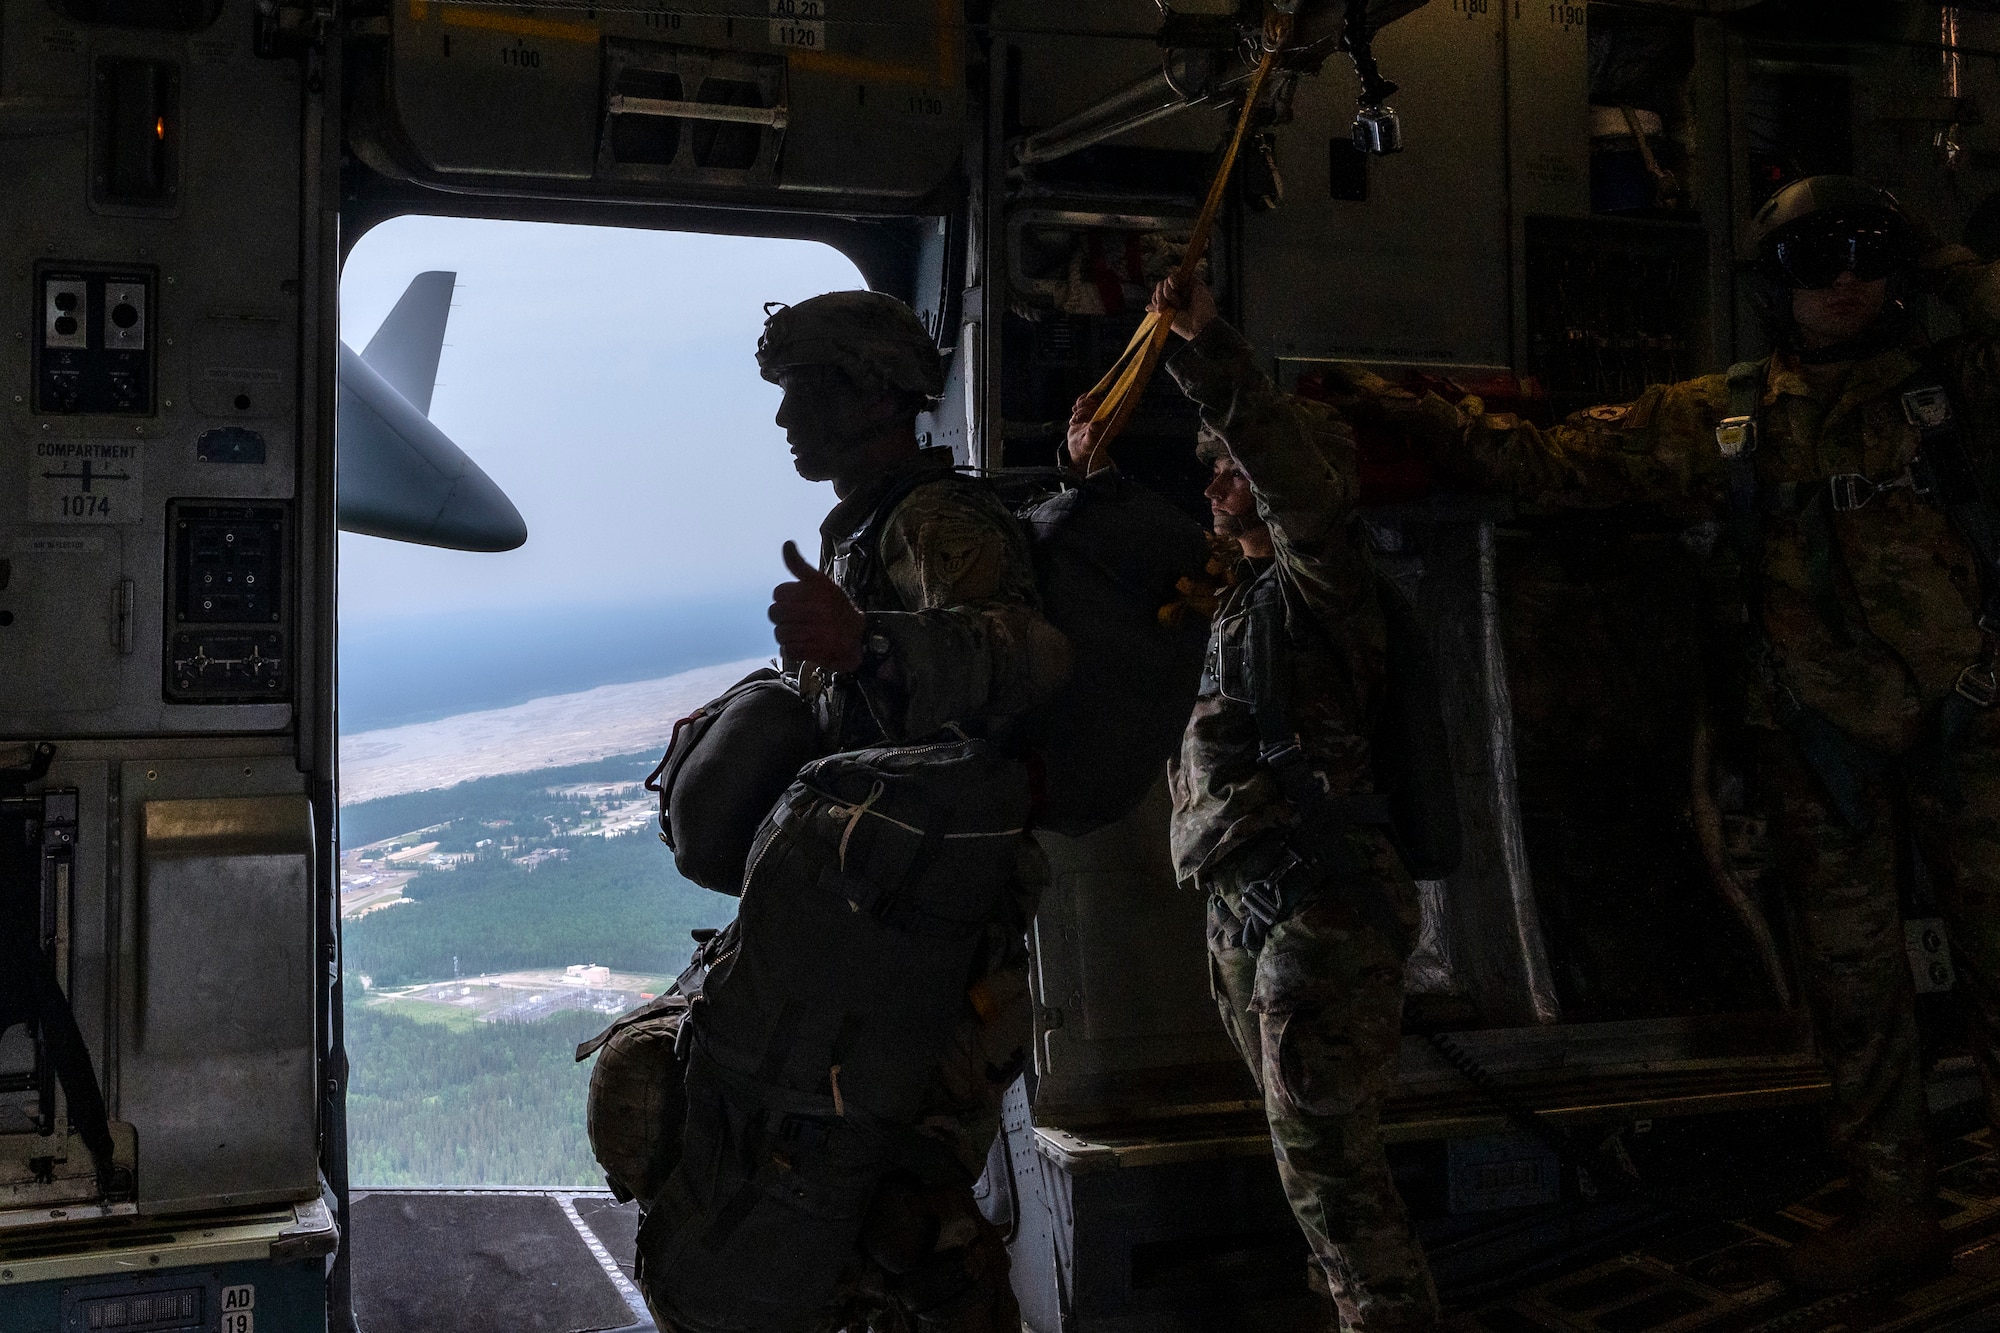 U.S. Army Sgt. 1st Class Charlie Arrendale, gives a thumbs-up signal prior to the paratroopers jumping out of a C-17 Globemaster III from the 517th Airlift Squadron, Joint Base Elmendorf-Richardson, Alaska over Allen Army Airfield, Fort Greely, June 15, 2022. RF-A provides realistic combat training by integrating joint, coalition and multilateral forces into simulated forward operating bases. The paratroopers and Arrendale are assigned to the 2nd Infantry Brigade Combat Team (Airborne), 11th Airborne Division. (U.S. Air Force photo by Sheila deVera)